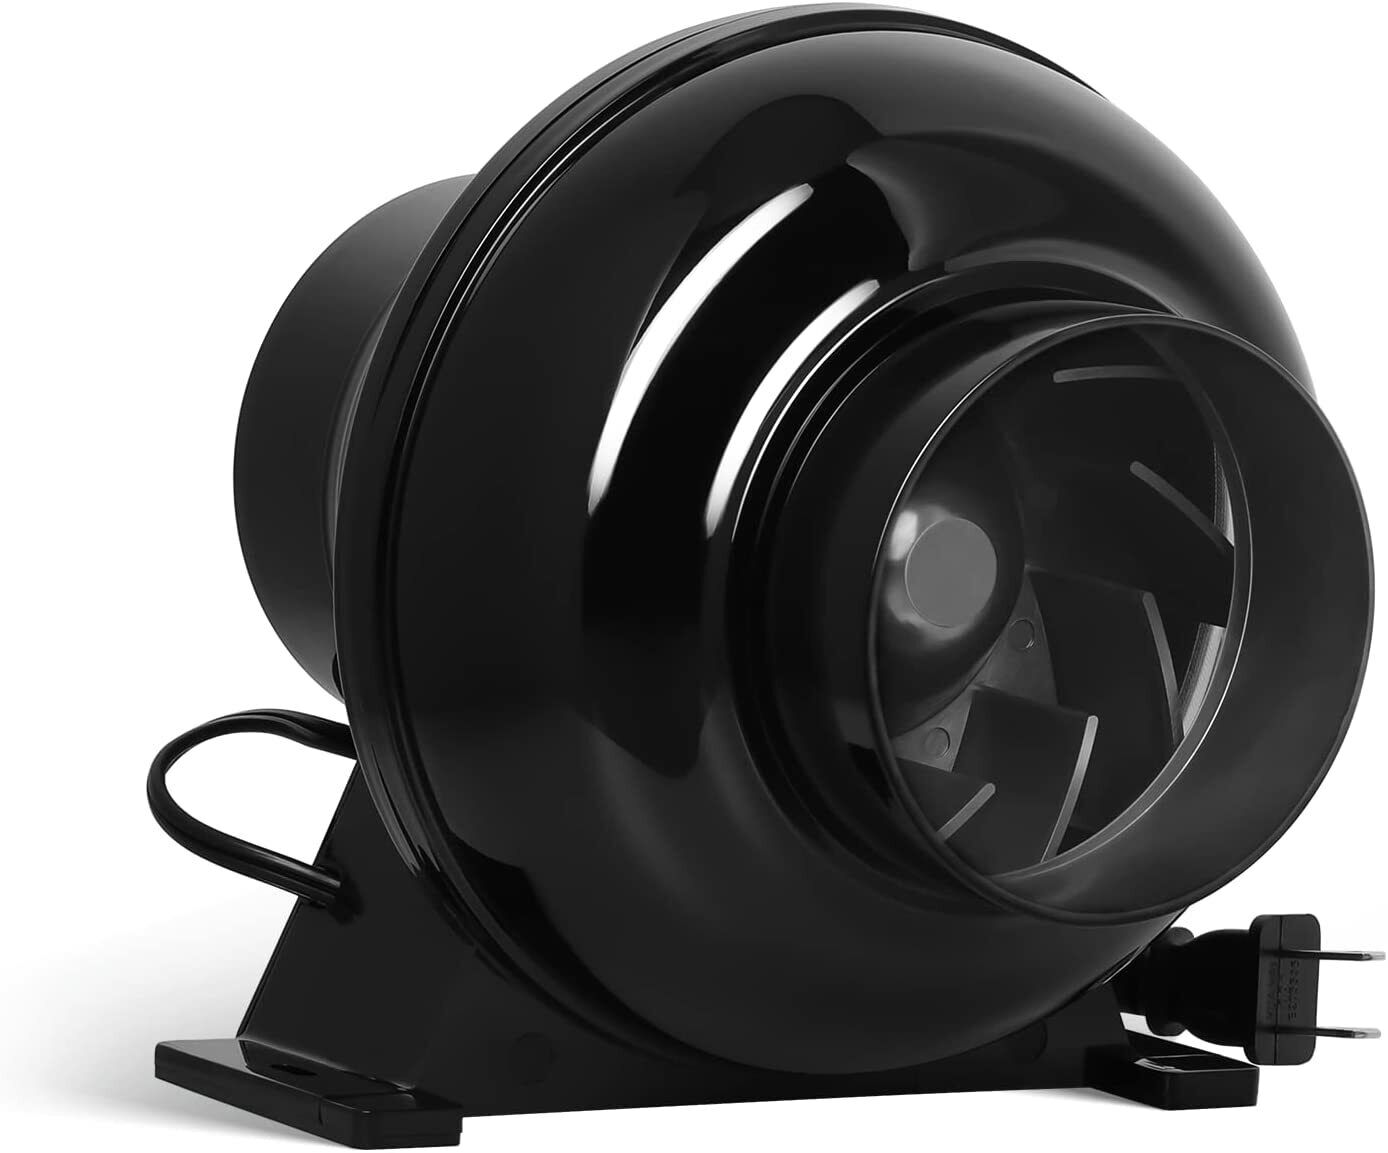 iPower 4 inch Inline Duct Ventilation Fan Vent Blower for Hydroponics Grow Tent